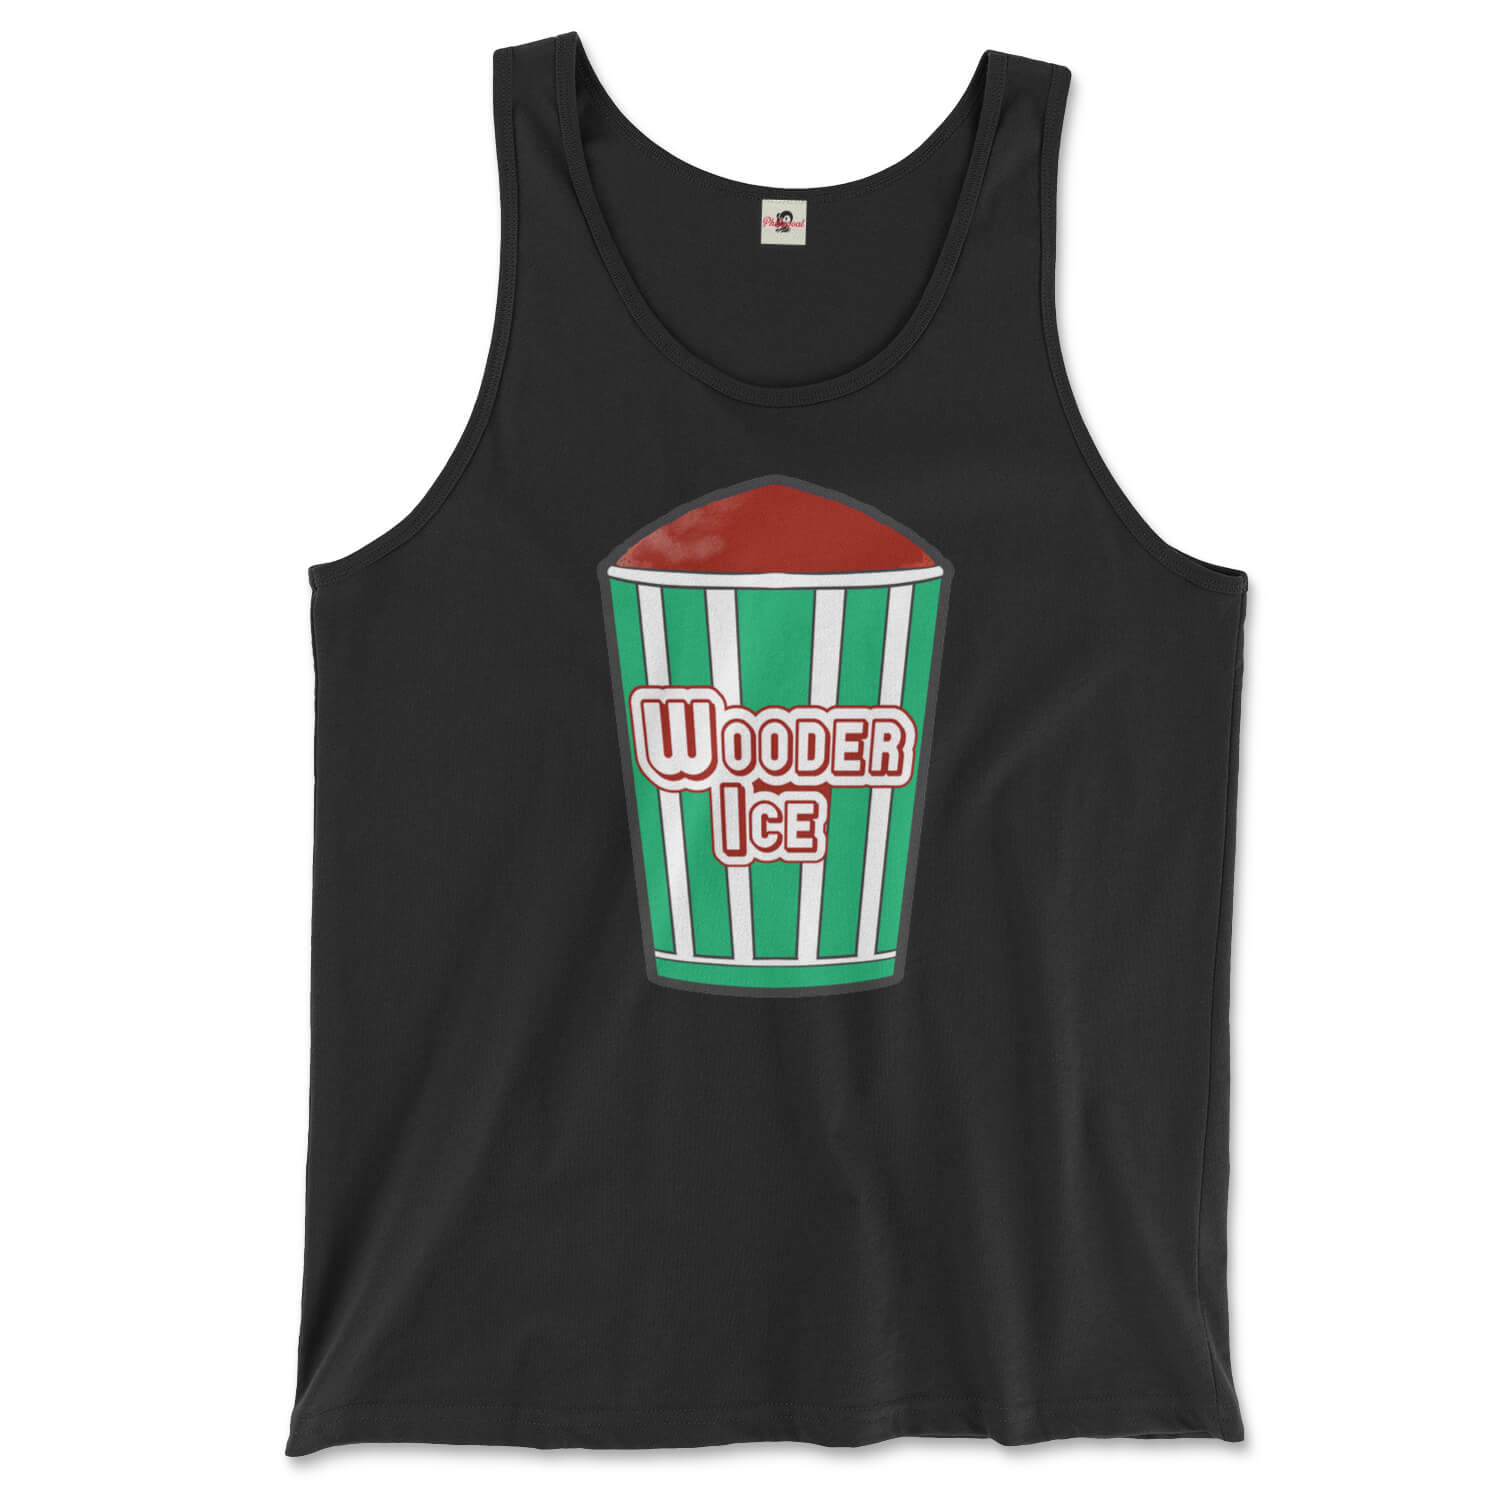 Philadelphia philly cherry italian water wooder ice design on a black tank top from Phillygoat 